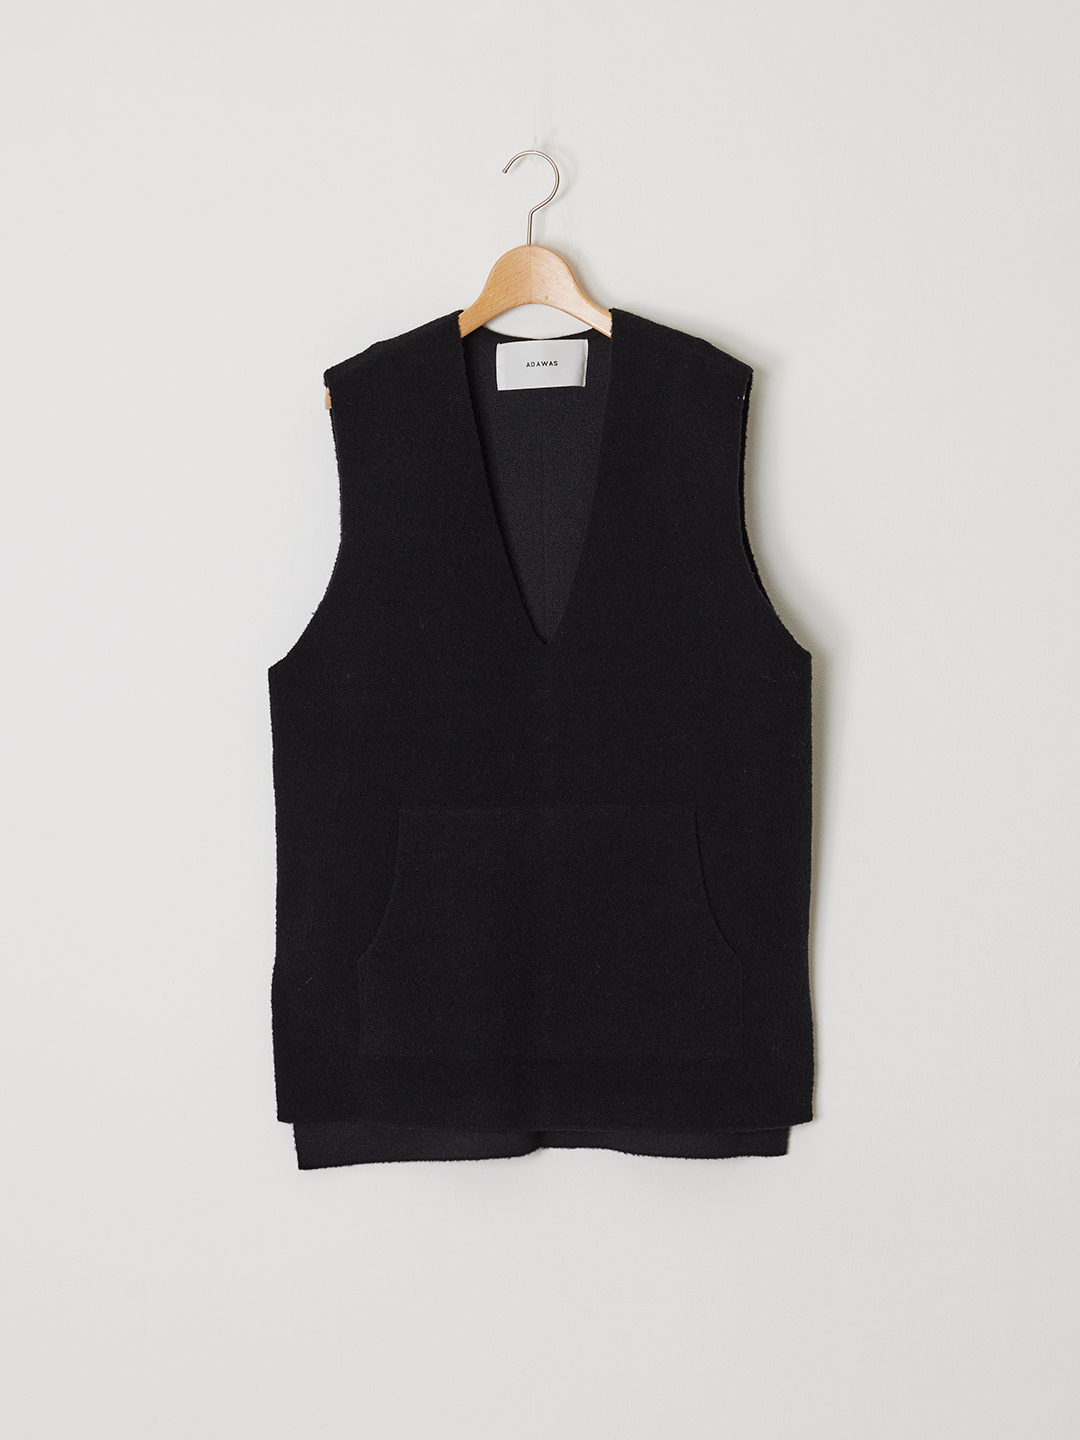 ADAWAS 公式ONLINE / DOUBLE-FACED KNIT VEST